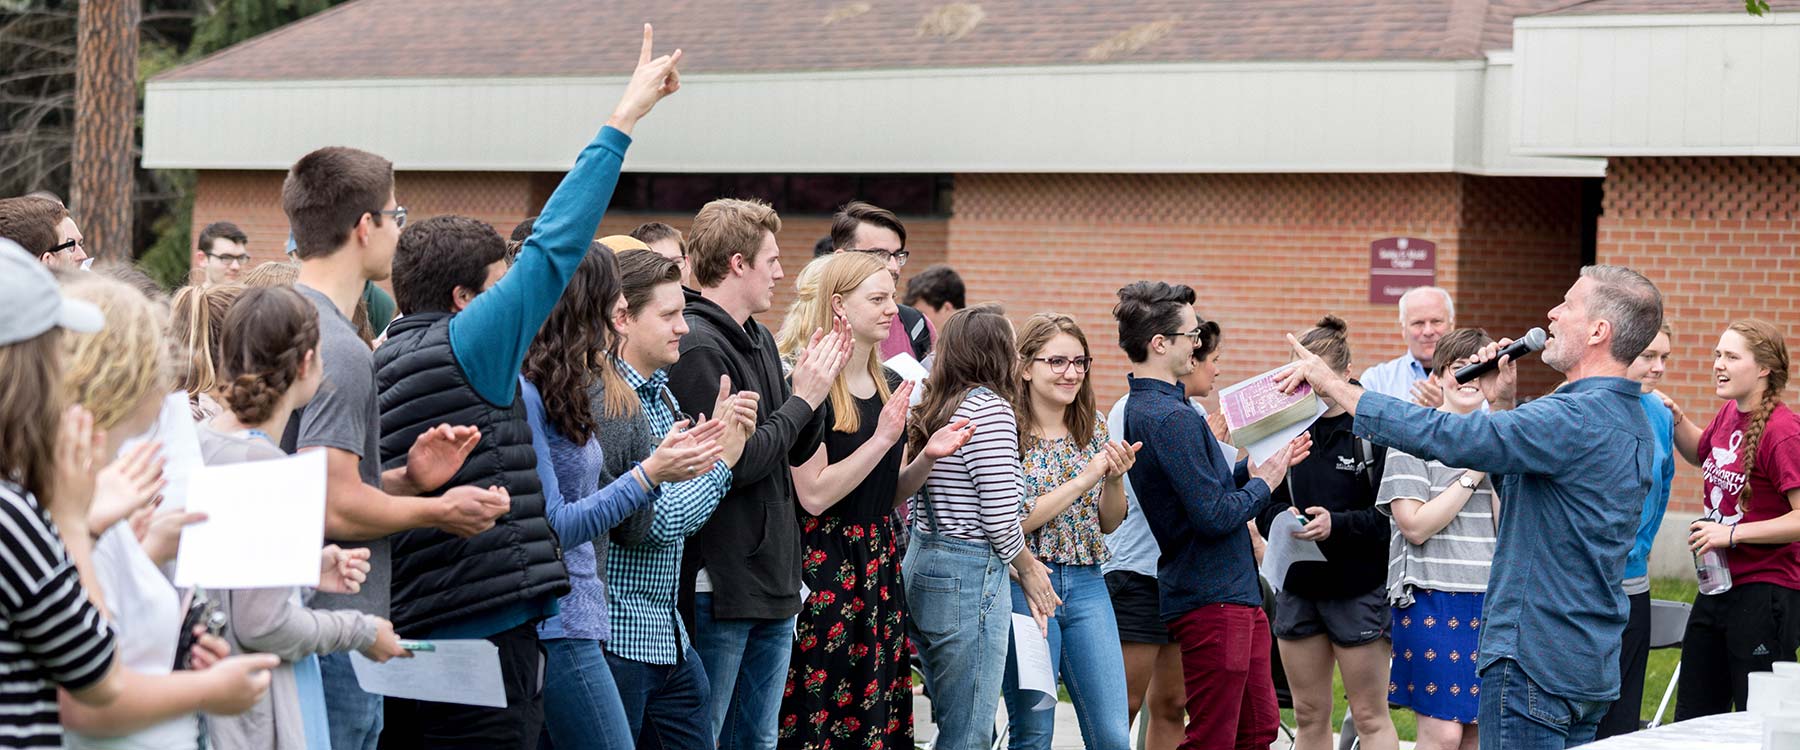 Students smile and clap as a professor addresses them through a microphone at an outdoor gathering.